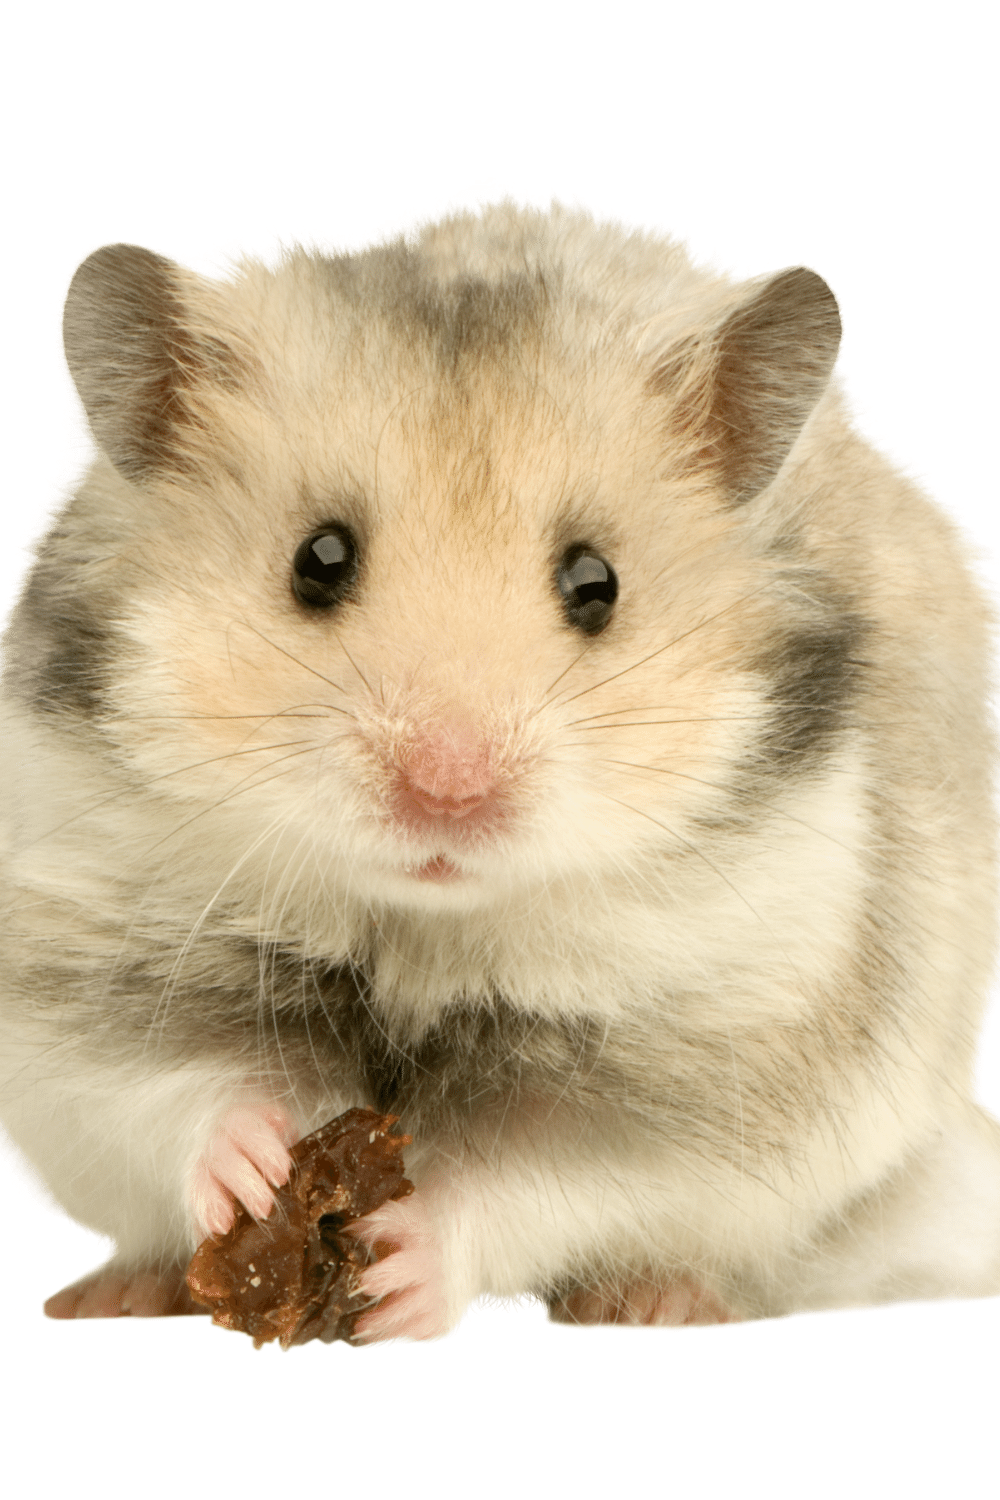 Hamster’s Eyes Look Cloudy and Opaque